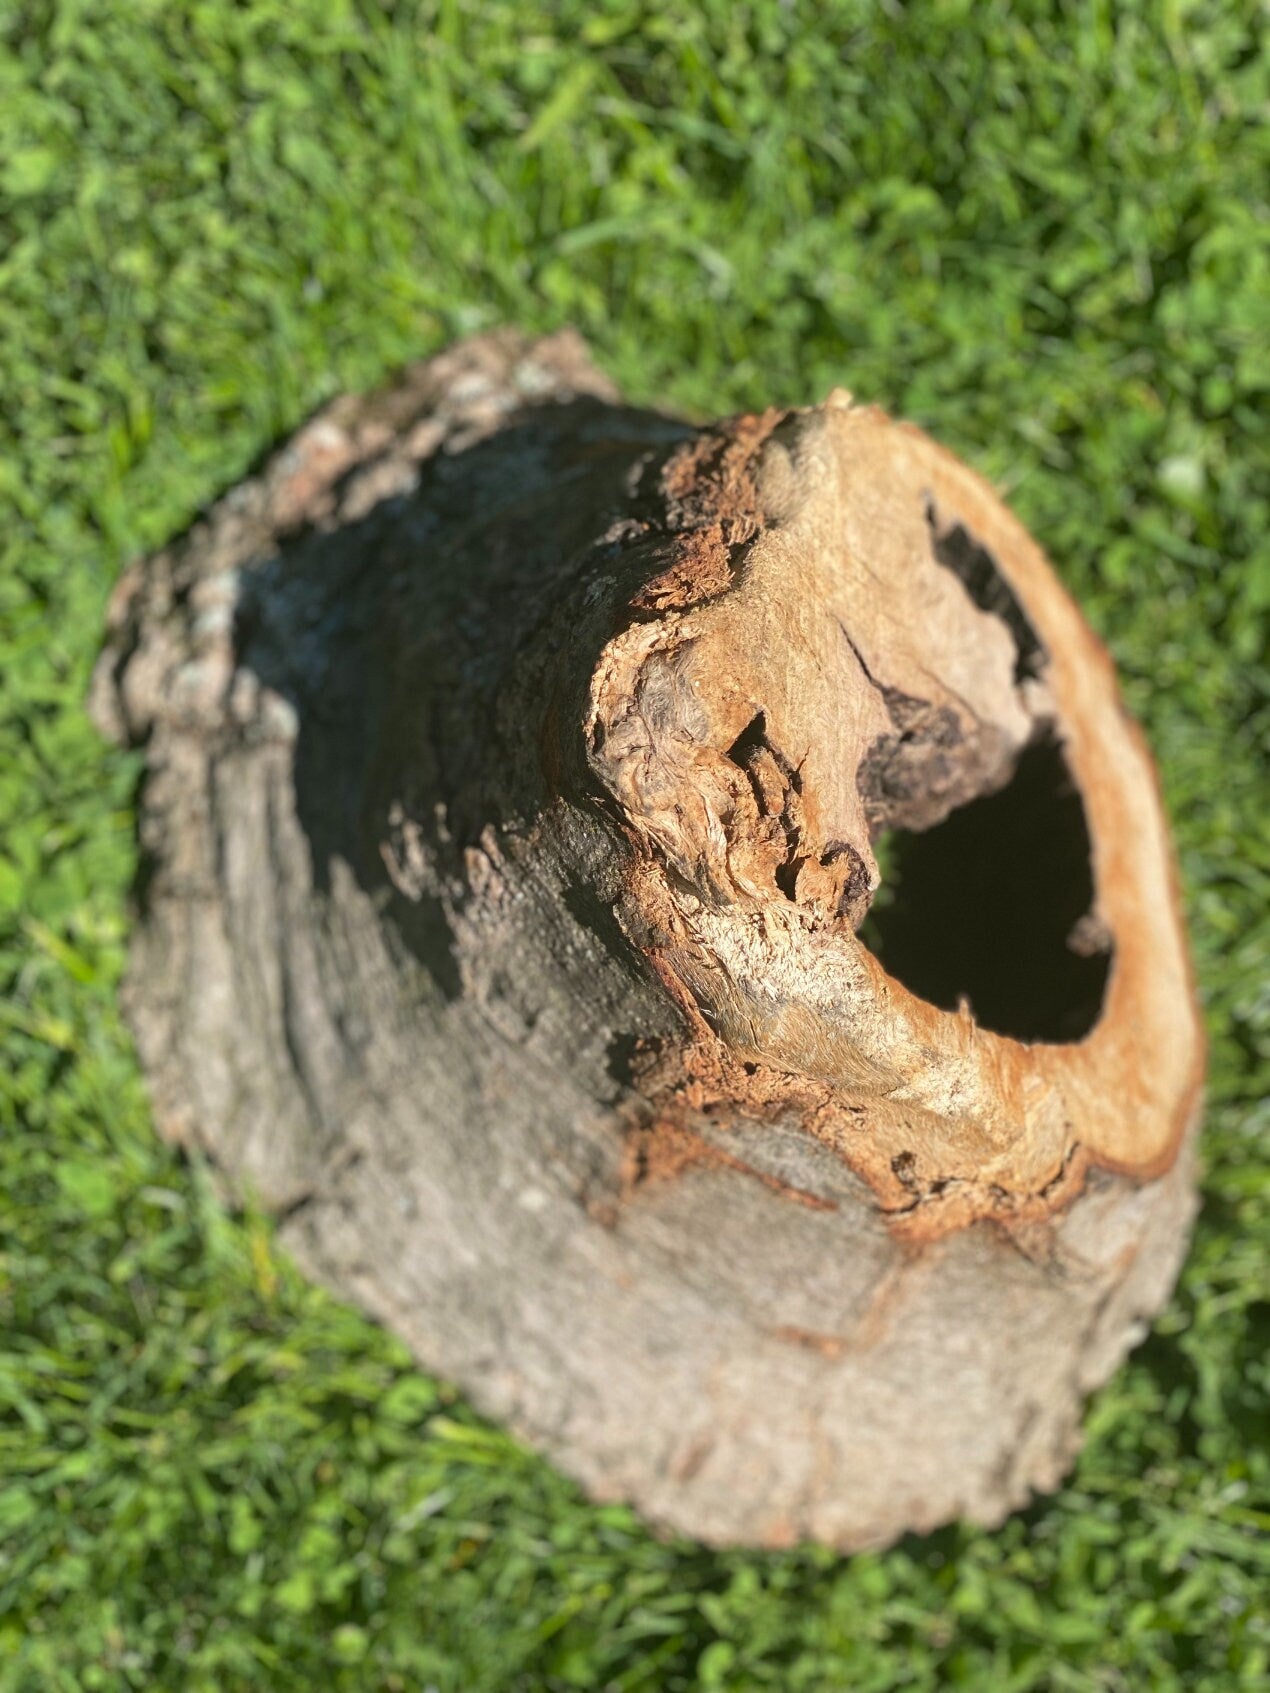 Maple Knot Hole, Stump, Approximately 12 Inches Long by 9 Inches Wide and 8 Inches Tall, Great for Taxidermy